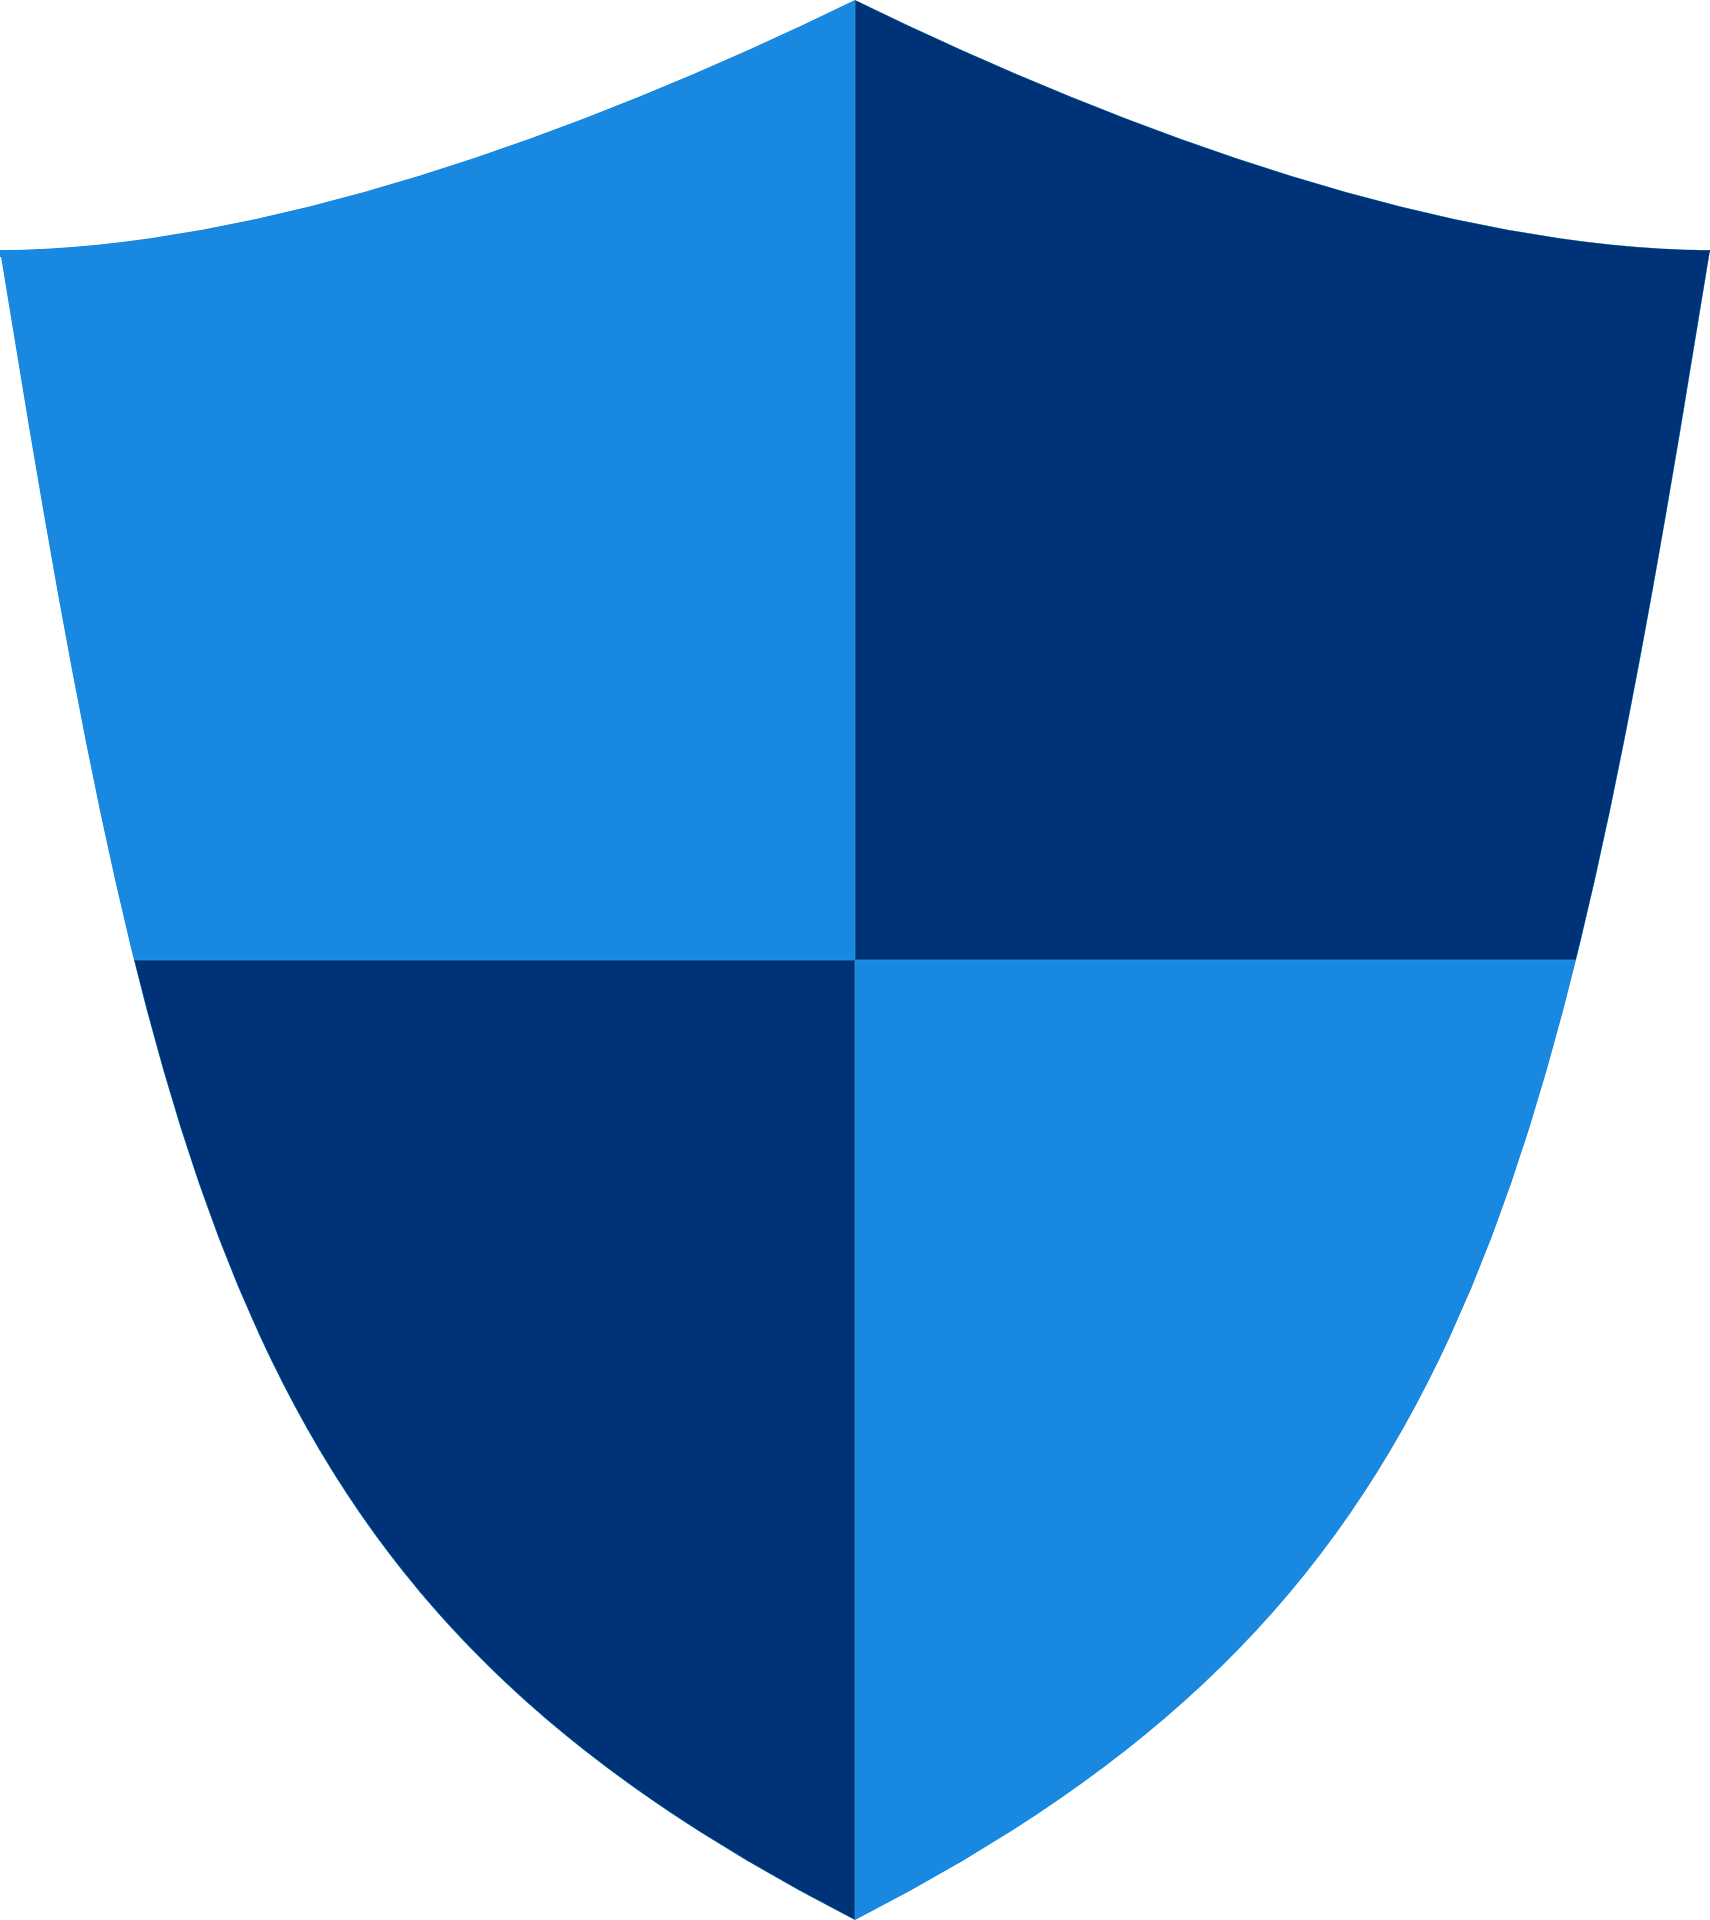 Image of a shield